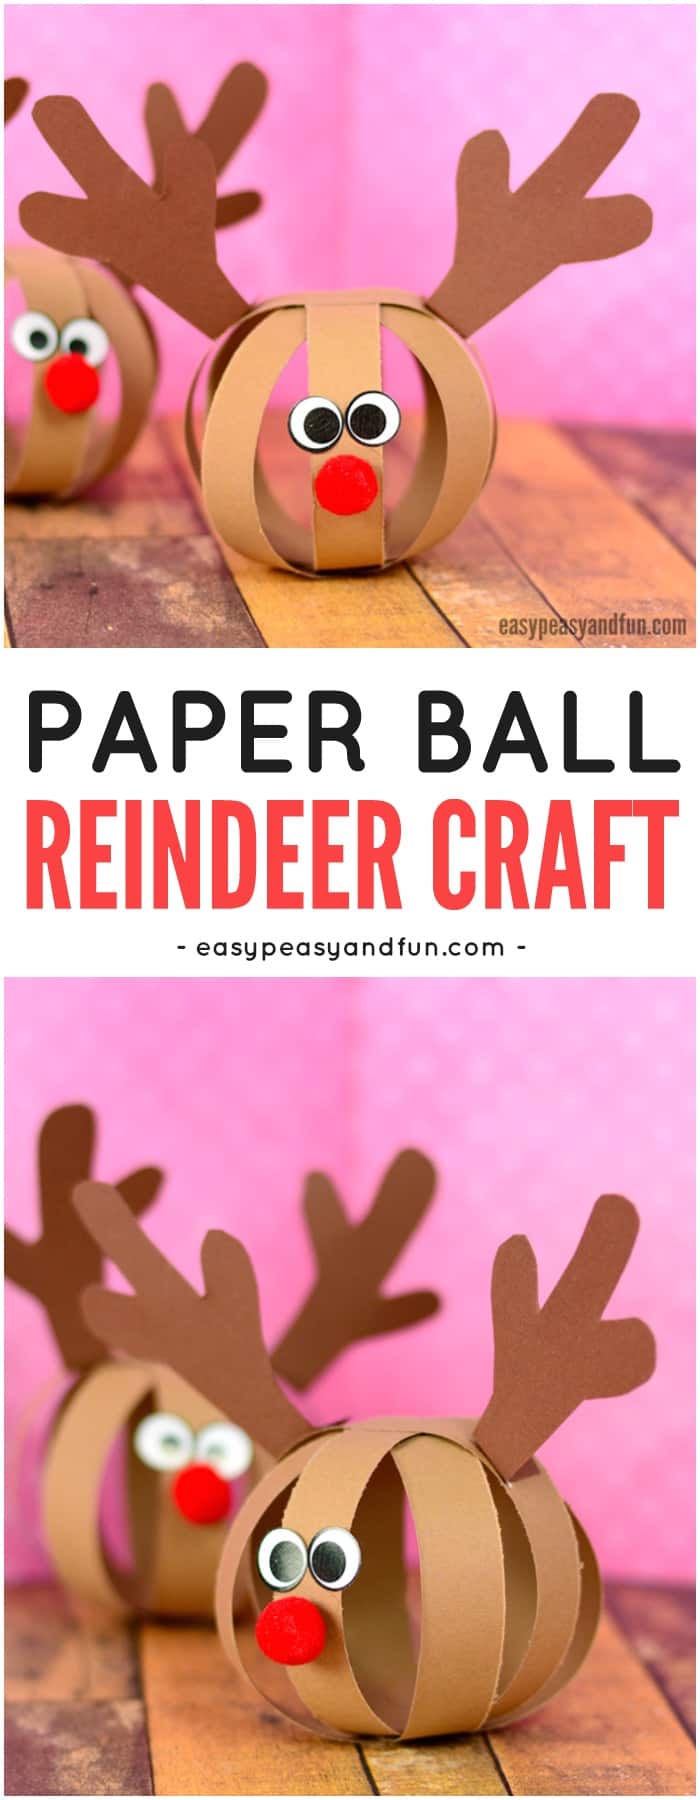 Adorable Paper Ball Reindeer Craft. Perfect Christmas Craft Activity for Kids to Make.